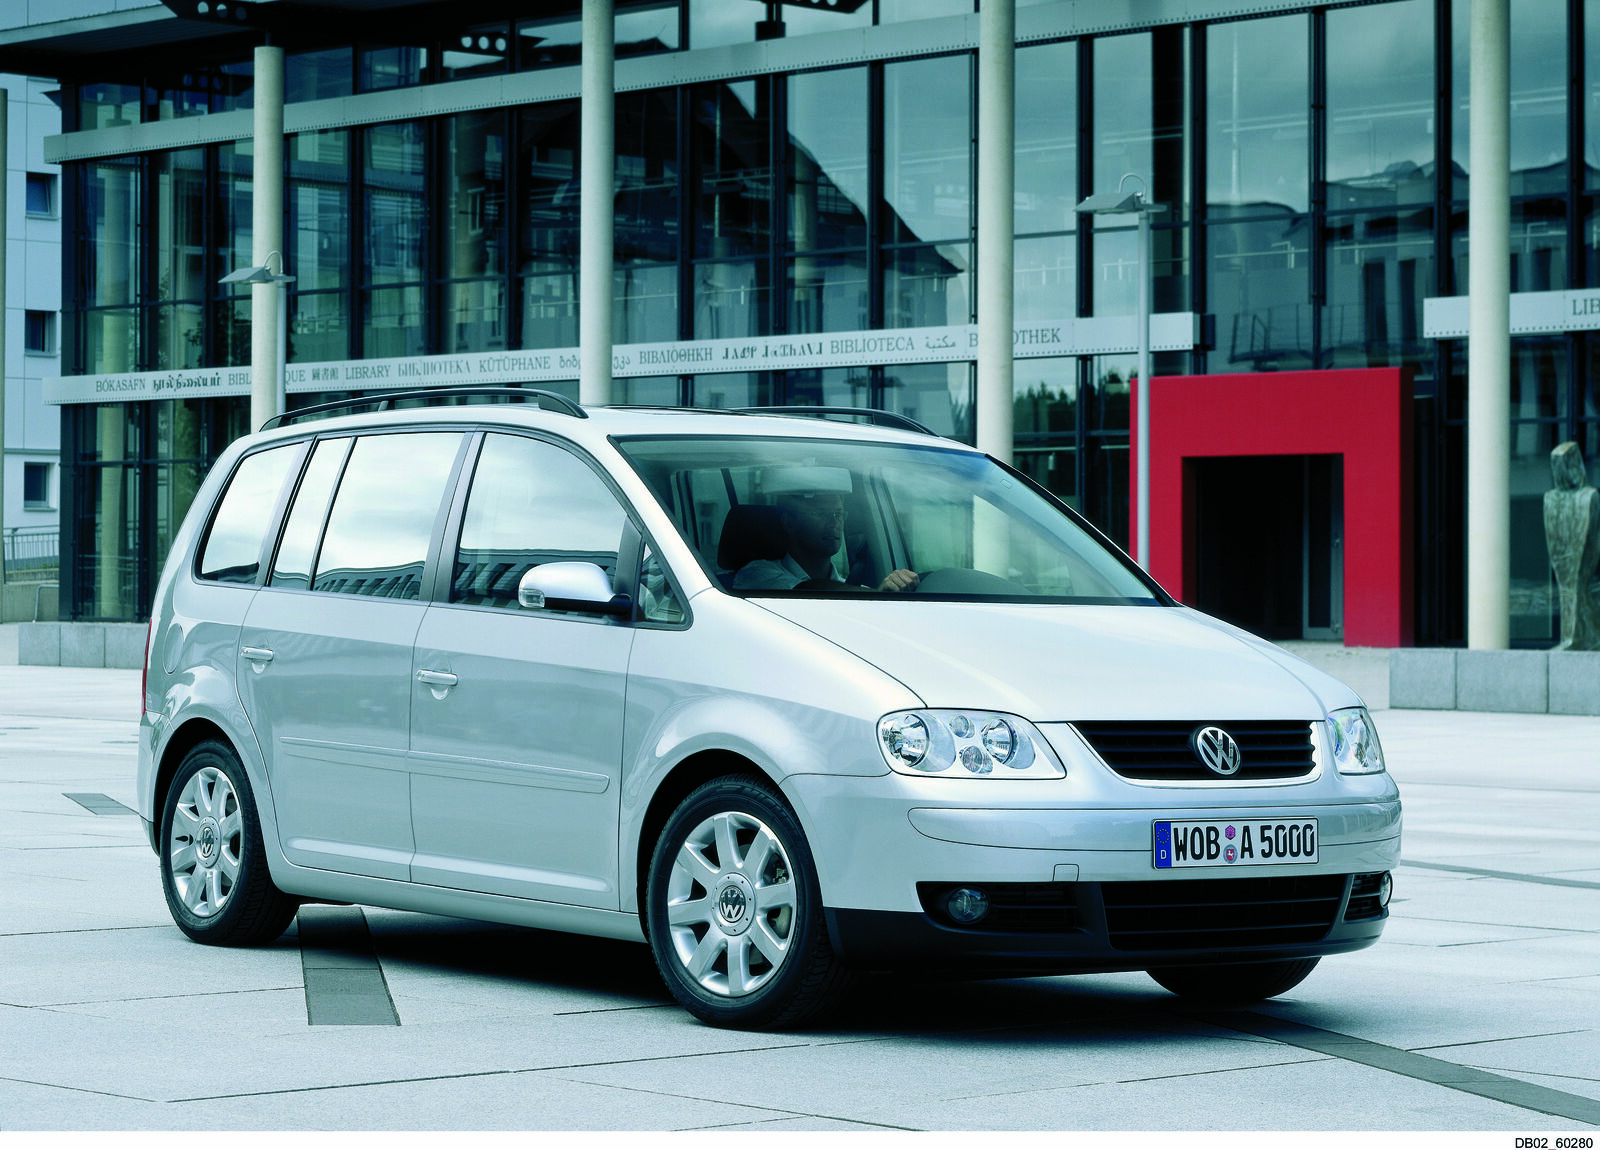 Suppliers to the new VW Touran